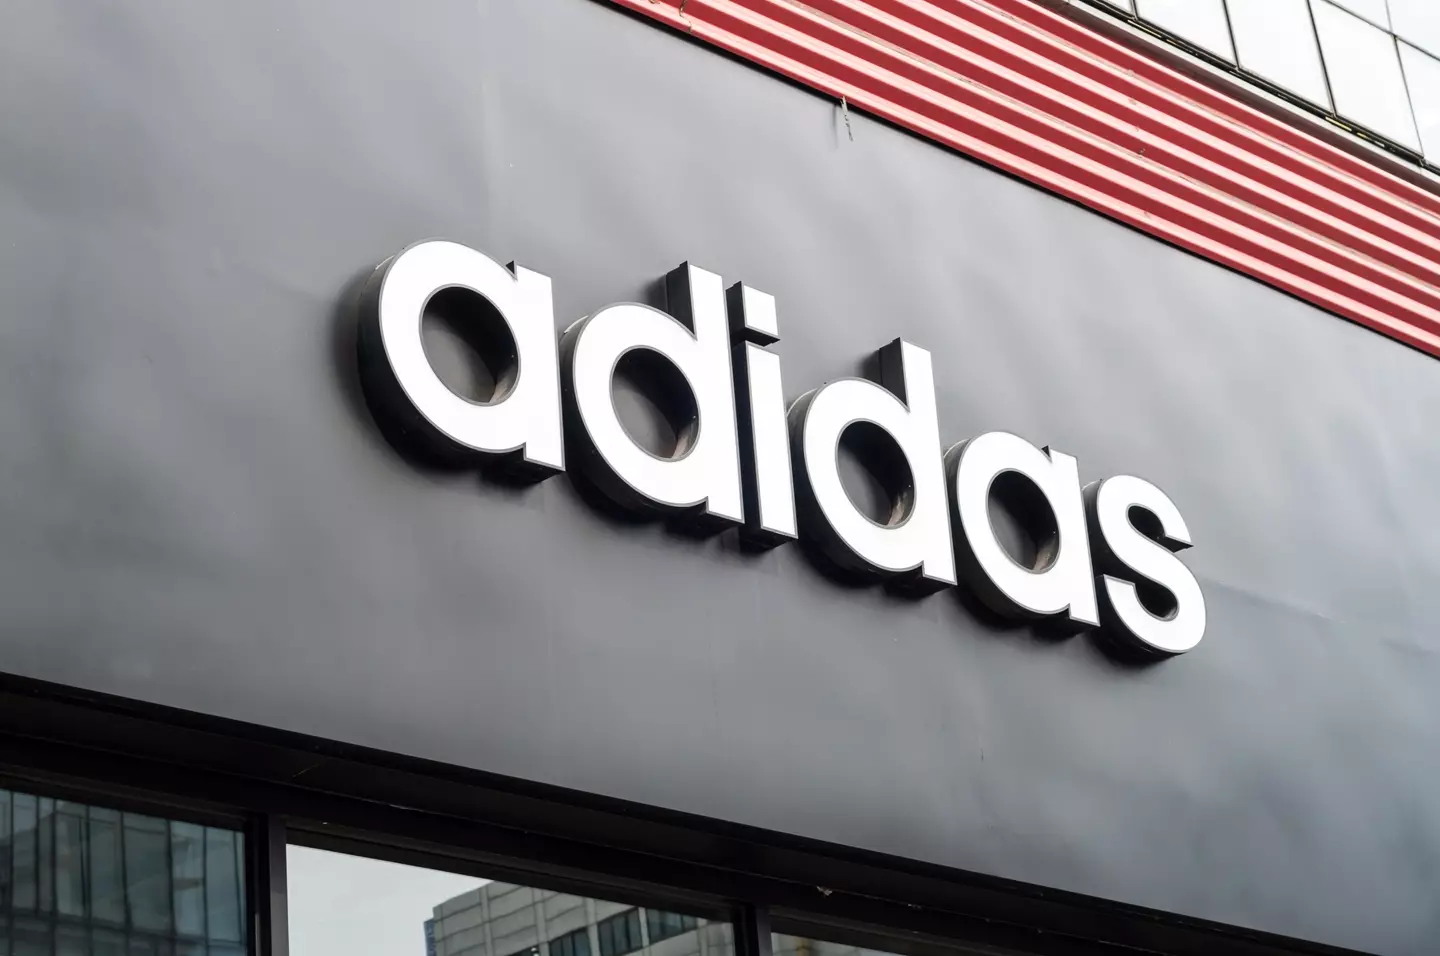 Adidas says West will not receive a cent from the remaining sales of Yeezys.